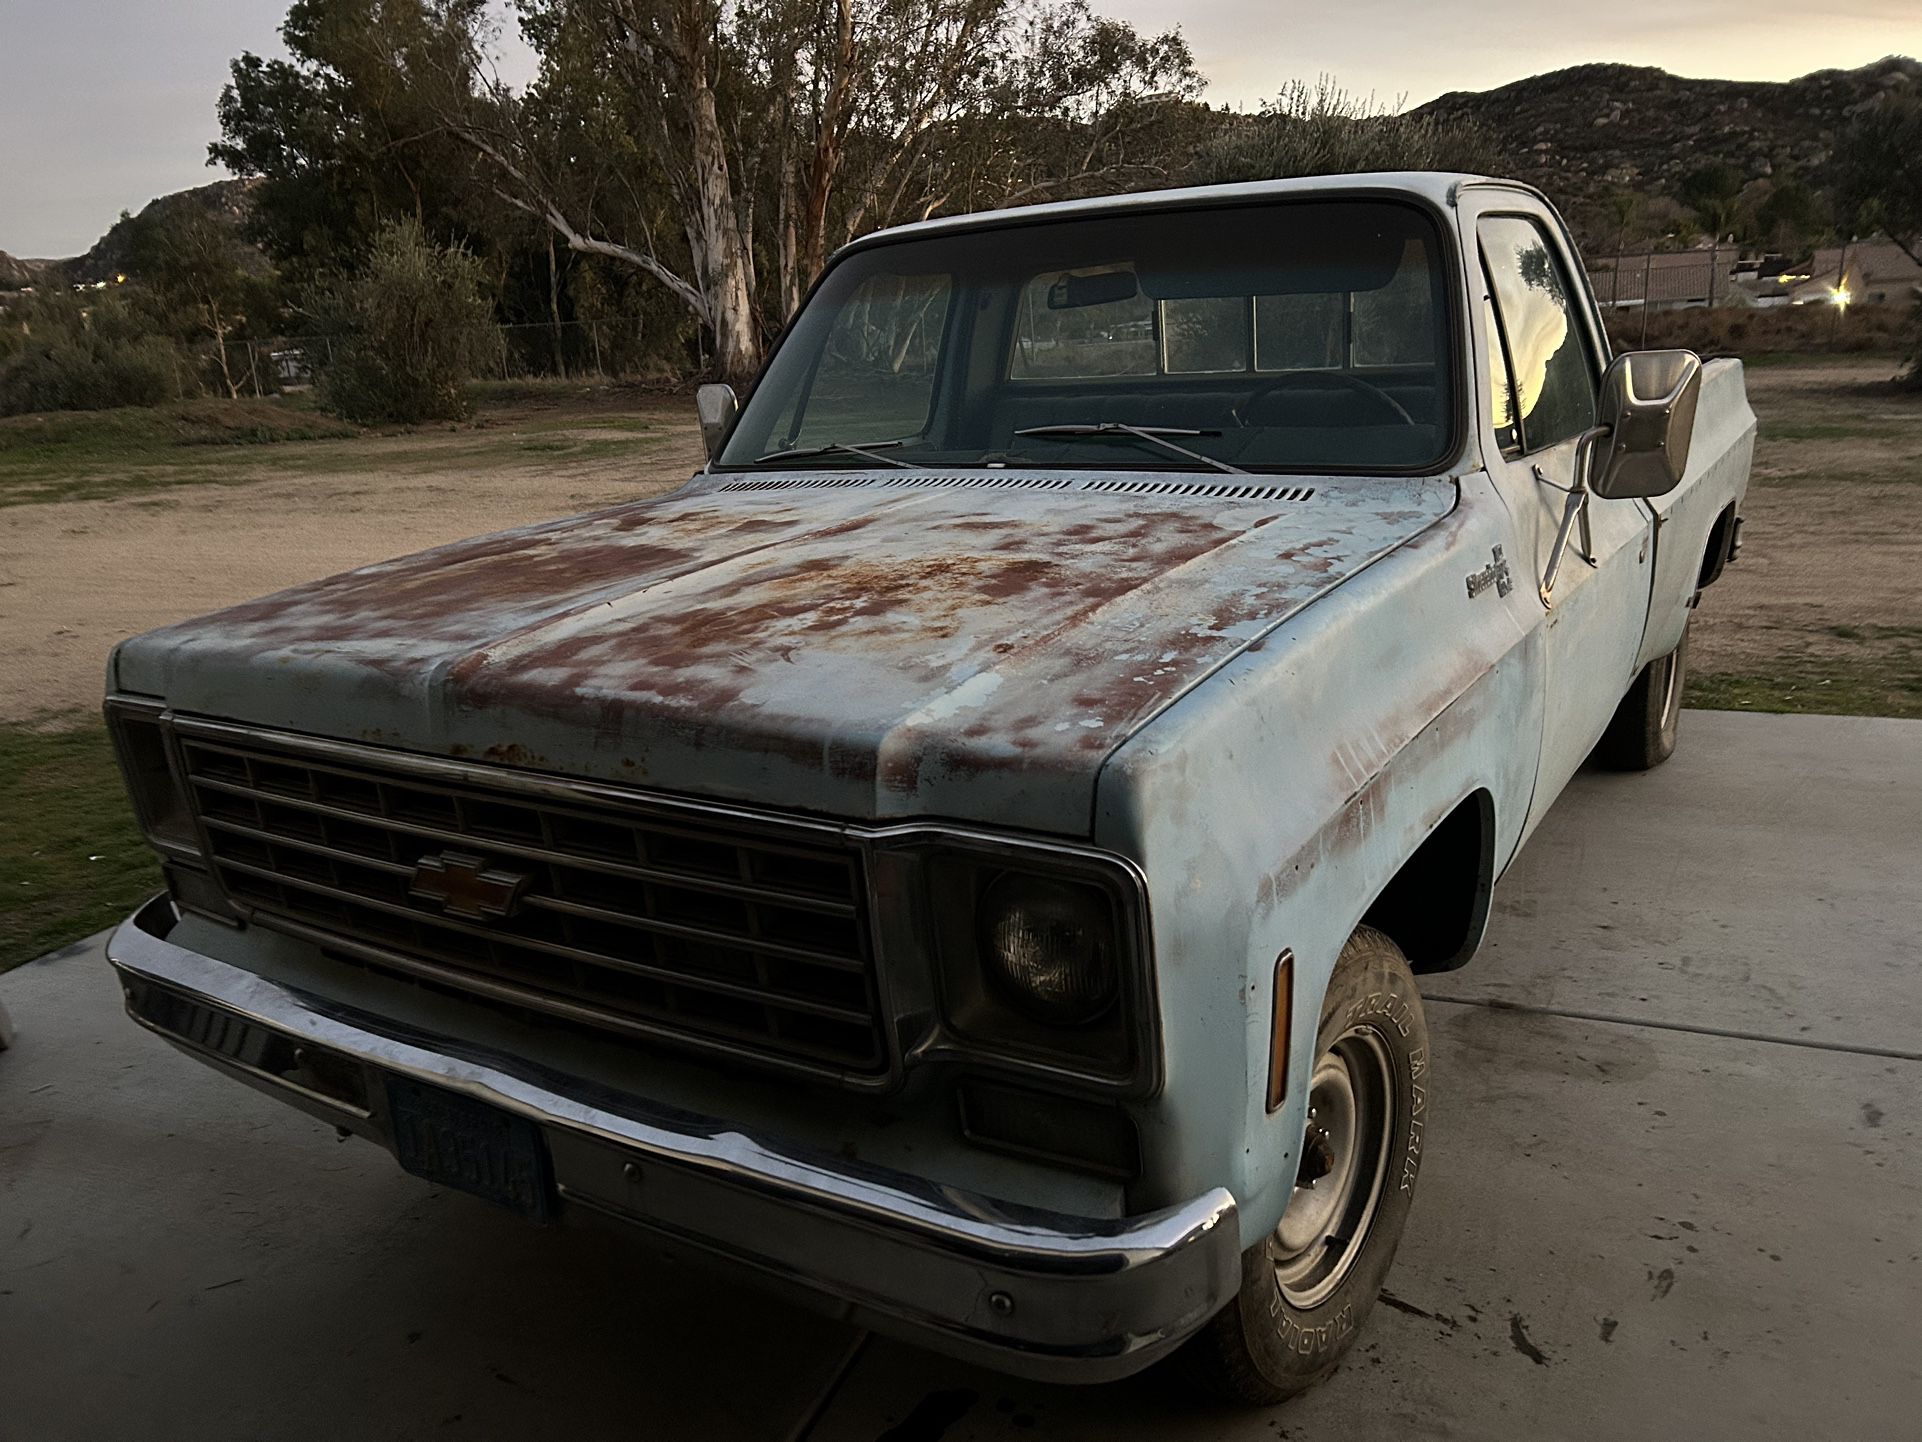 1975 Chevy C10 Long bed 350 Chevy engine Th400 Plus new parts 